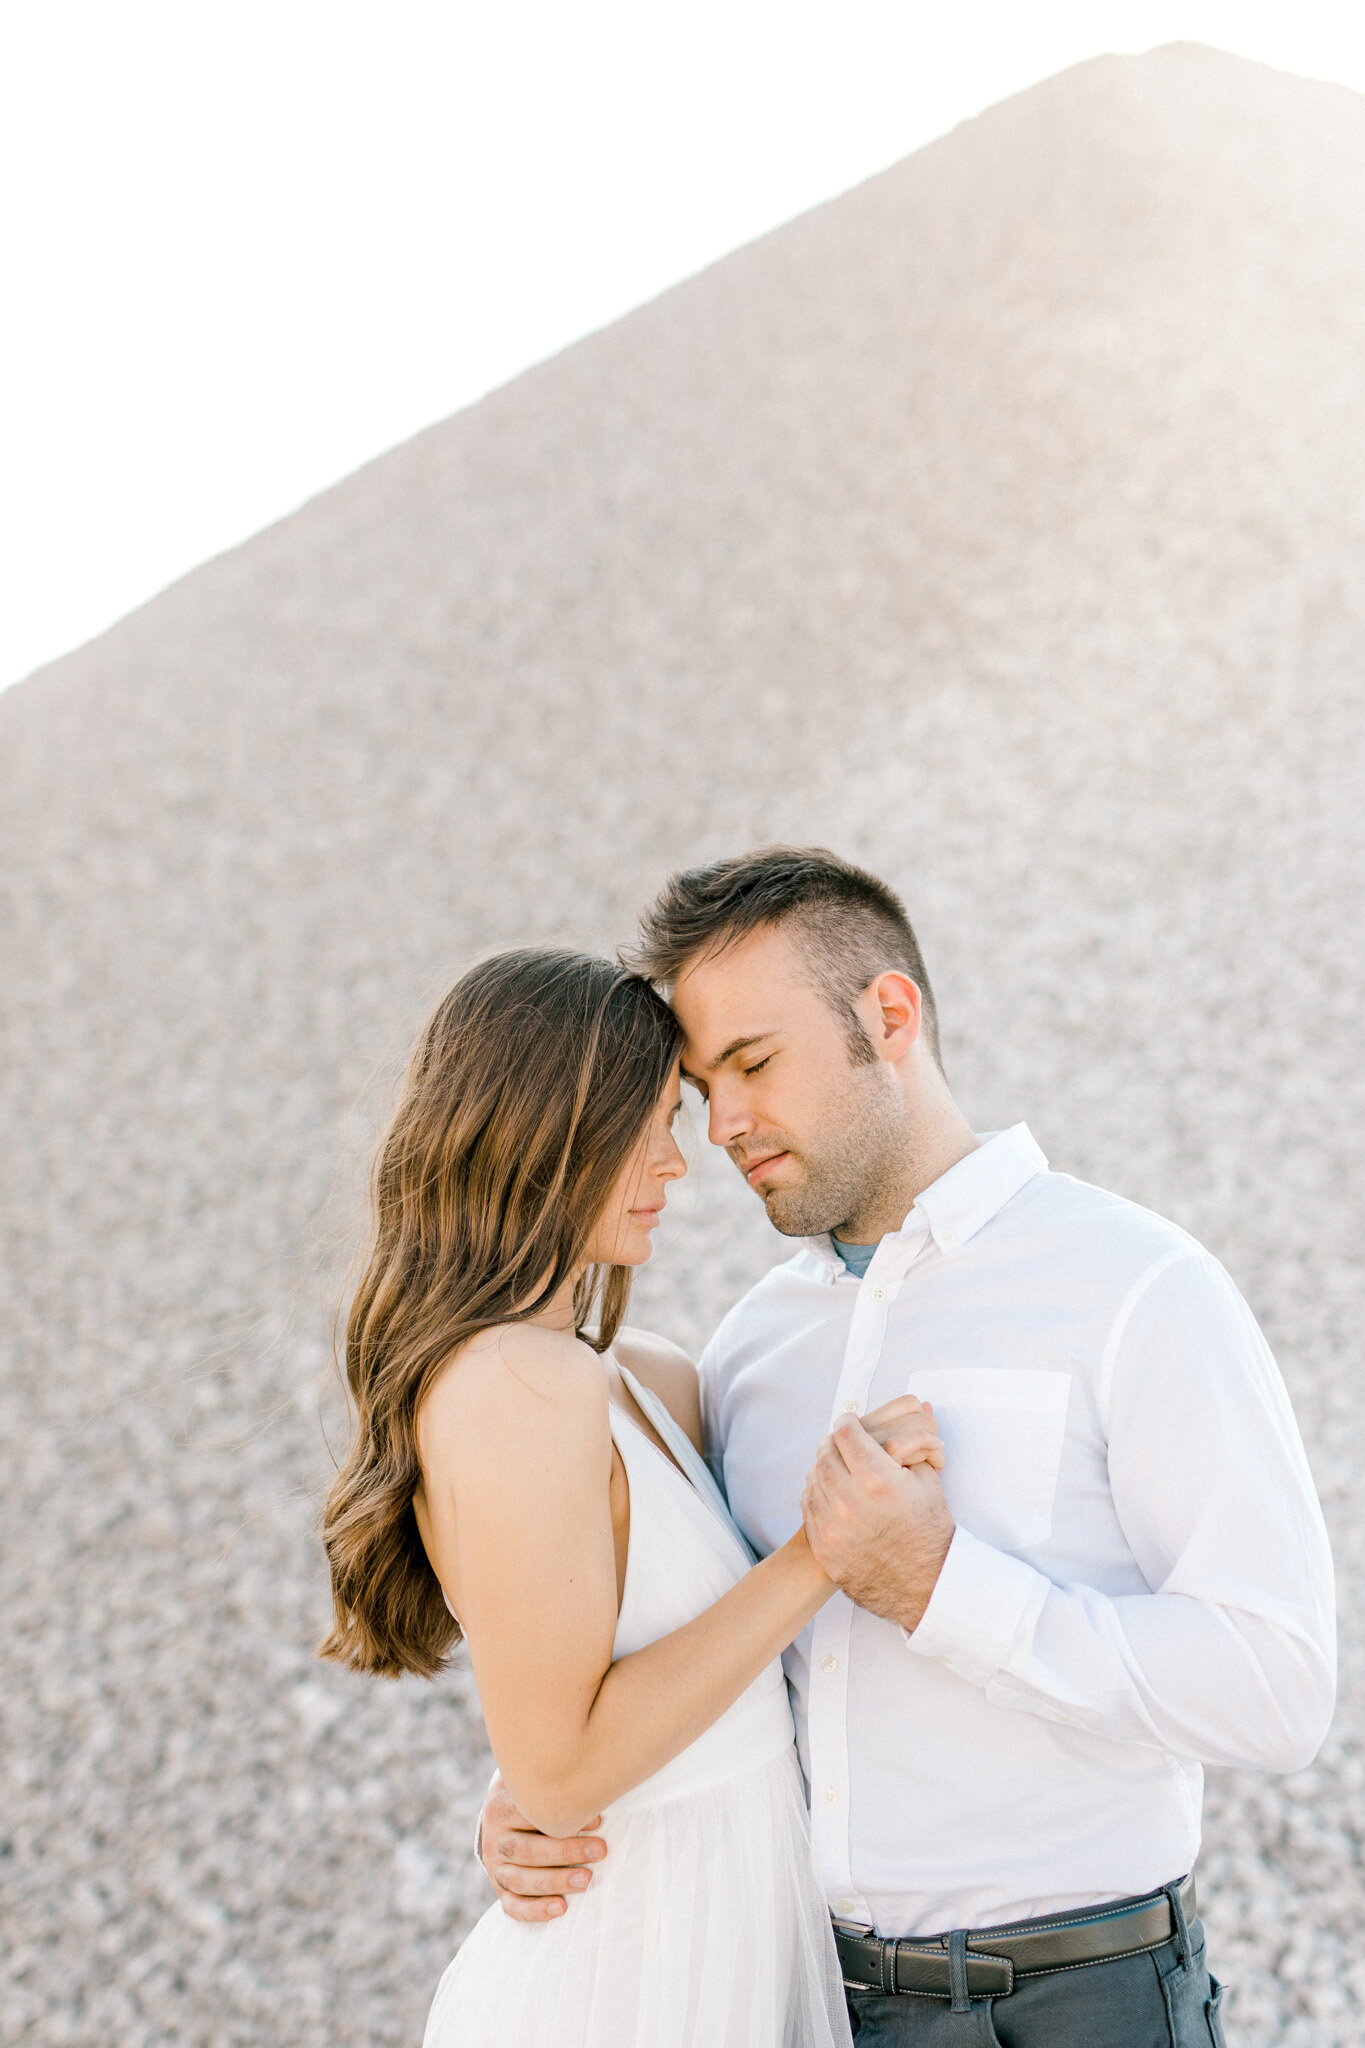 Light Filled Classy &amp; Romantic Engagement Session in Michigan | Light &amp; Airy Michigan Wedding Photographer | Black &amp; White Engagement